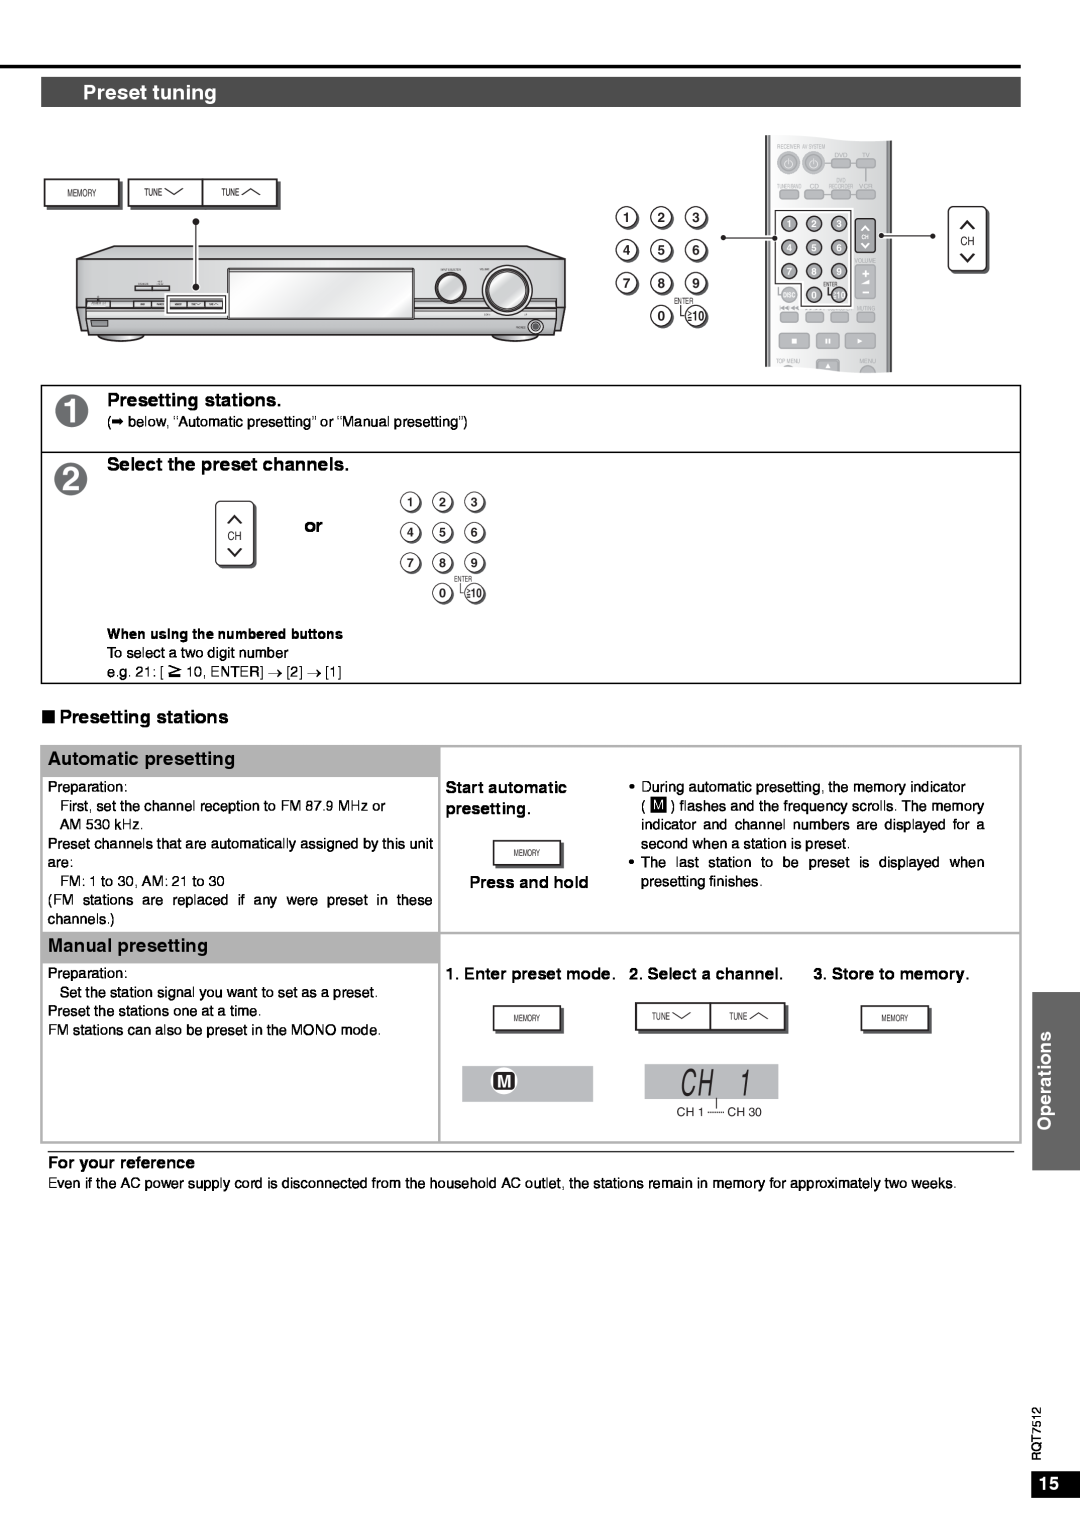 Panasonic SA-XR30 Preset tuning, Presetting stations, Select the preset channels, Operations, Press and hold, 1 2 4 5 